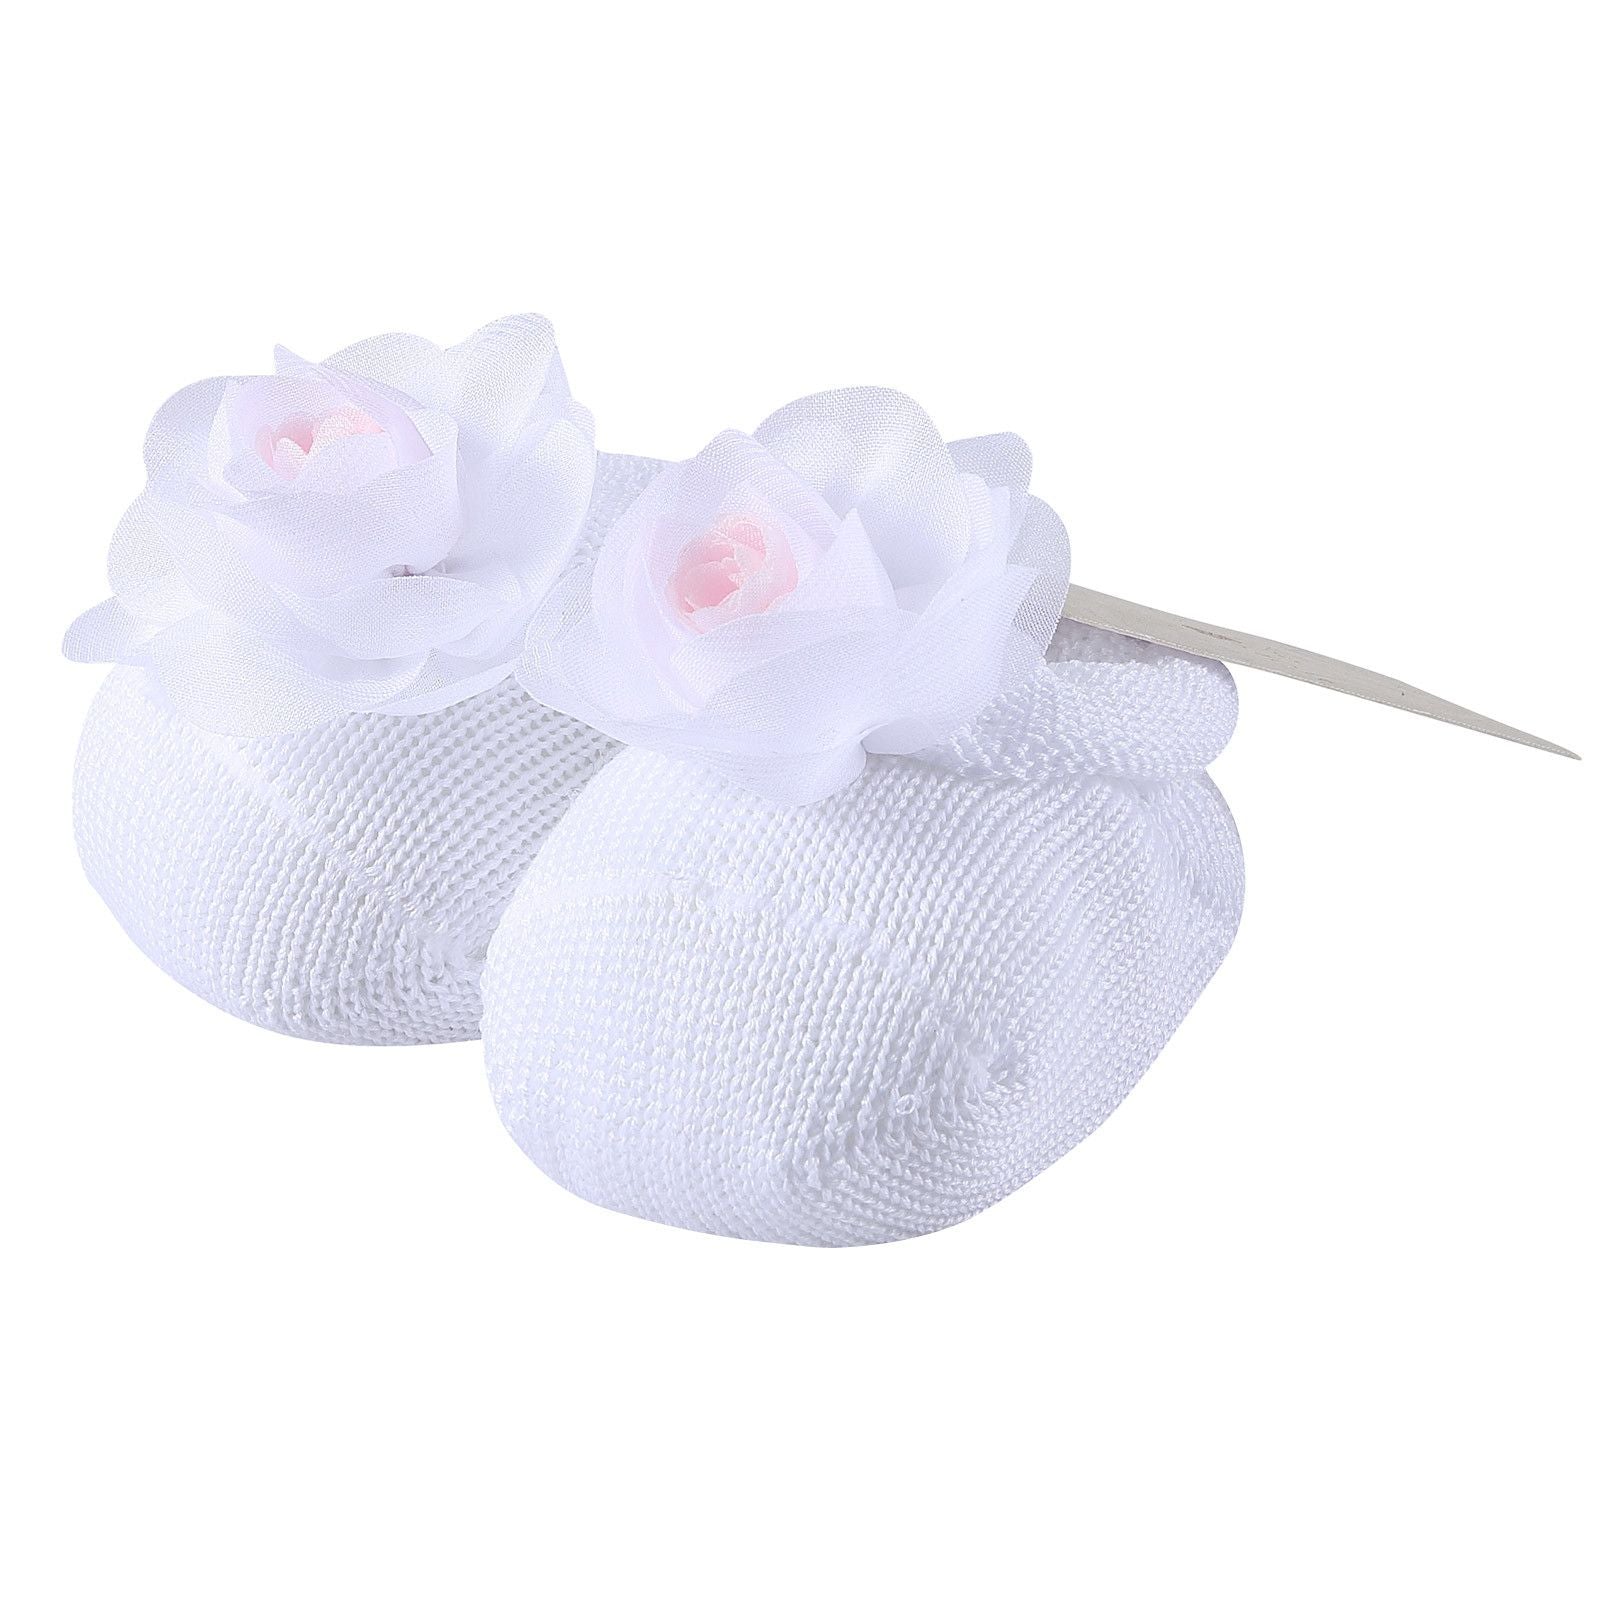 Baby White Knitted Cotton Rose Shoes&Hair Band Gift Set - CÉMAROSE | Children's Fashion Store - 2